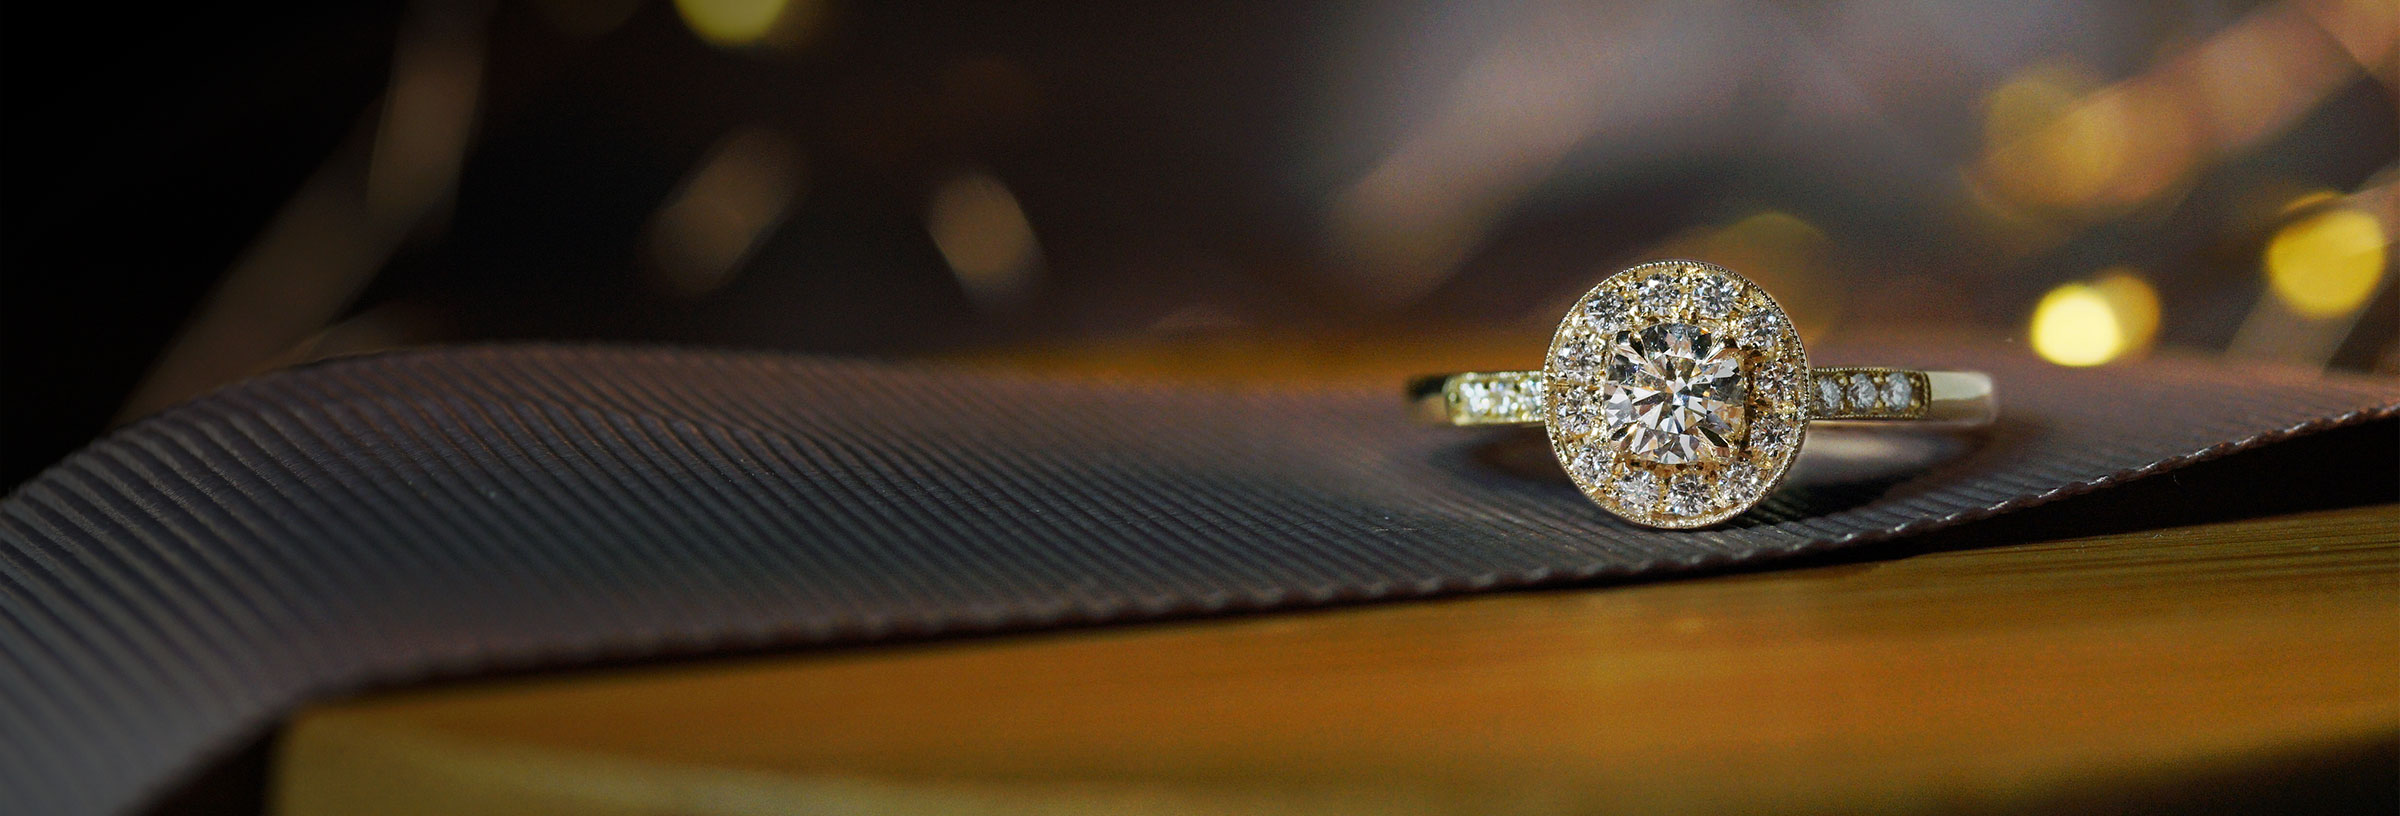 fairtrade-yellow-gold-diamond-engagement-ring-with-halo